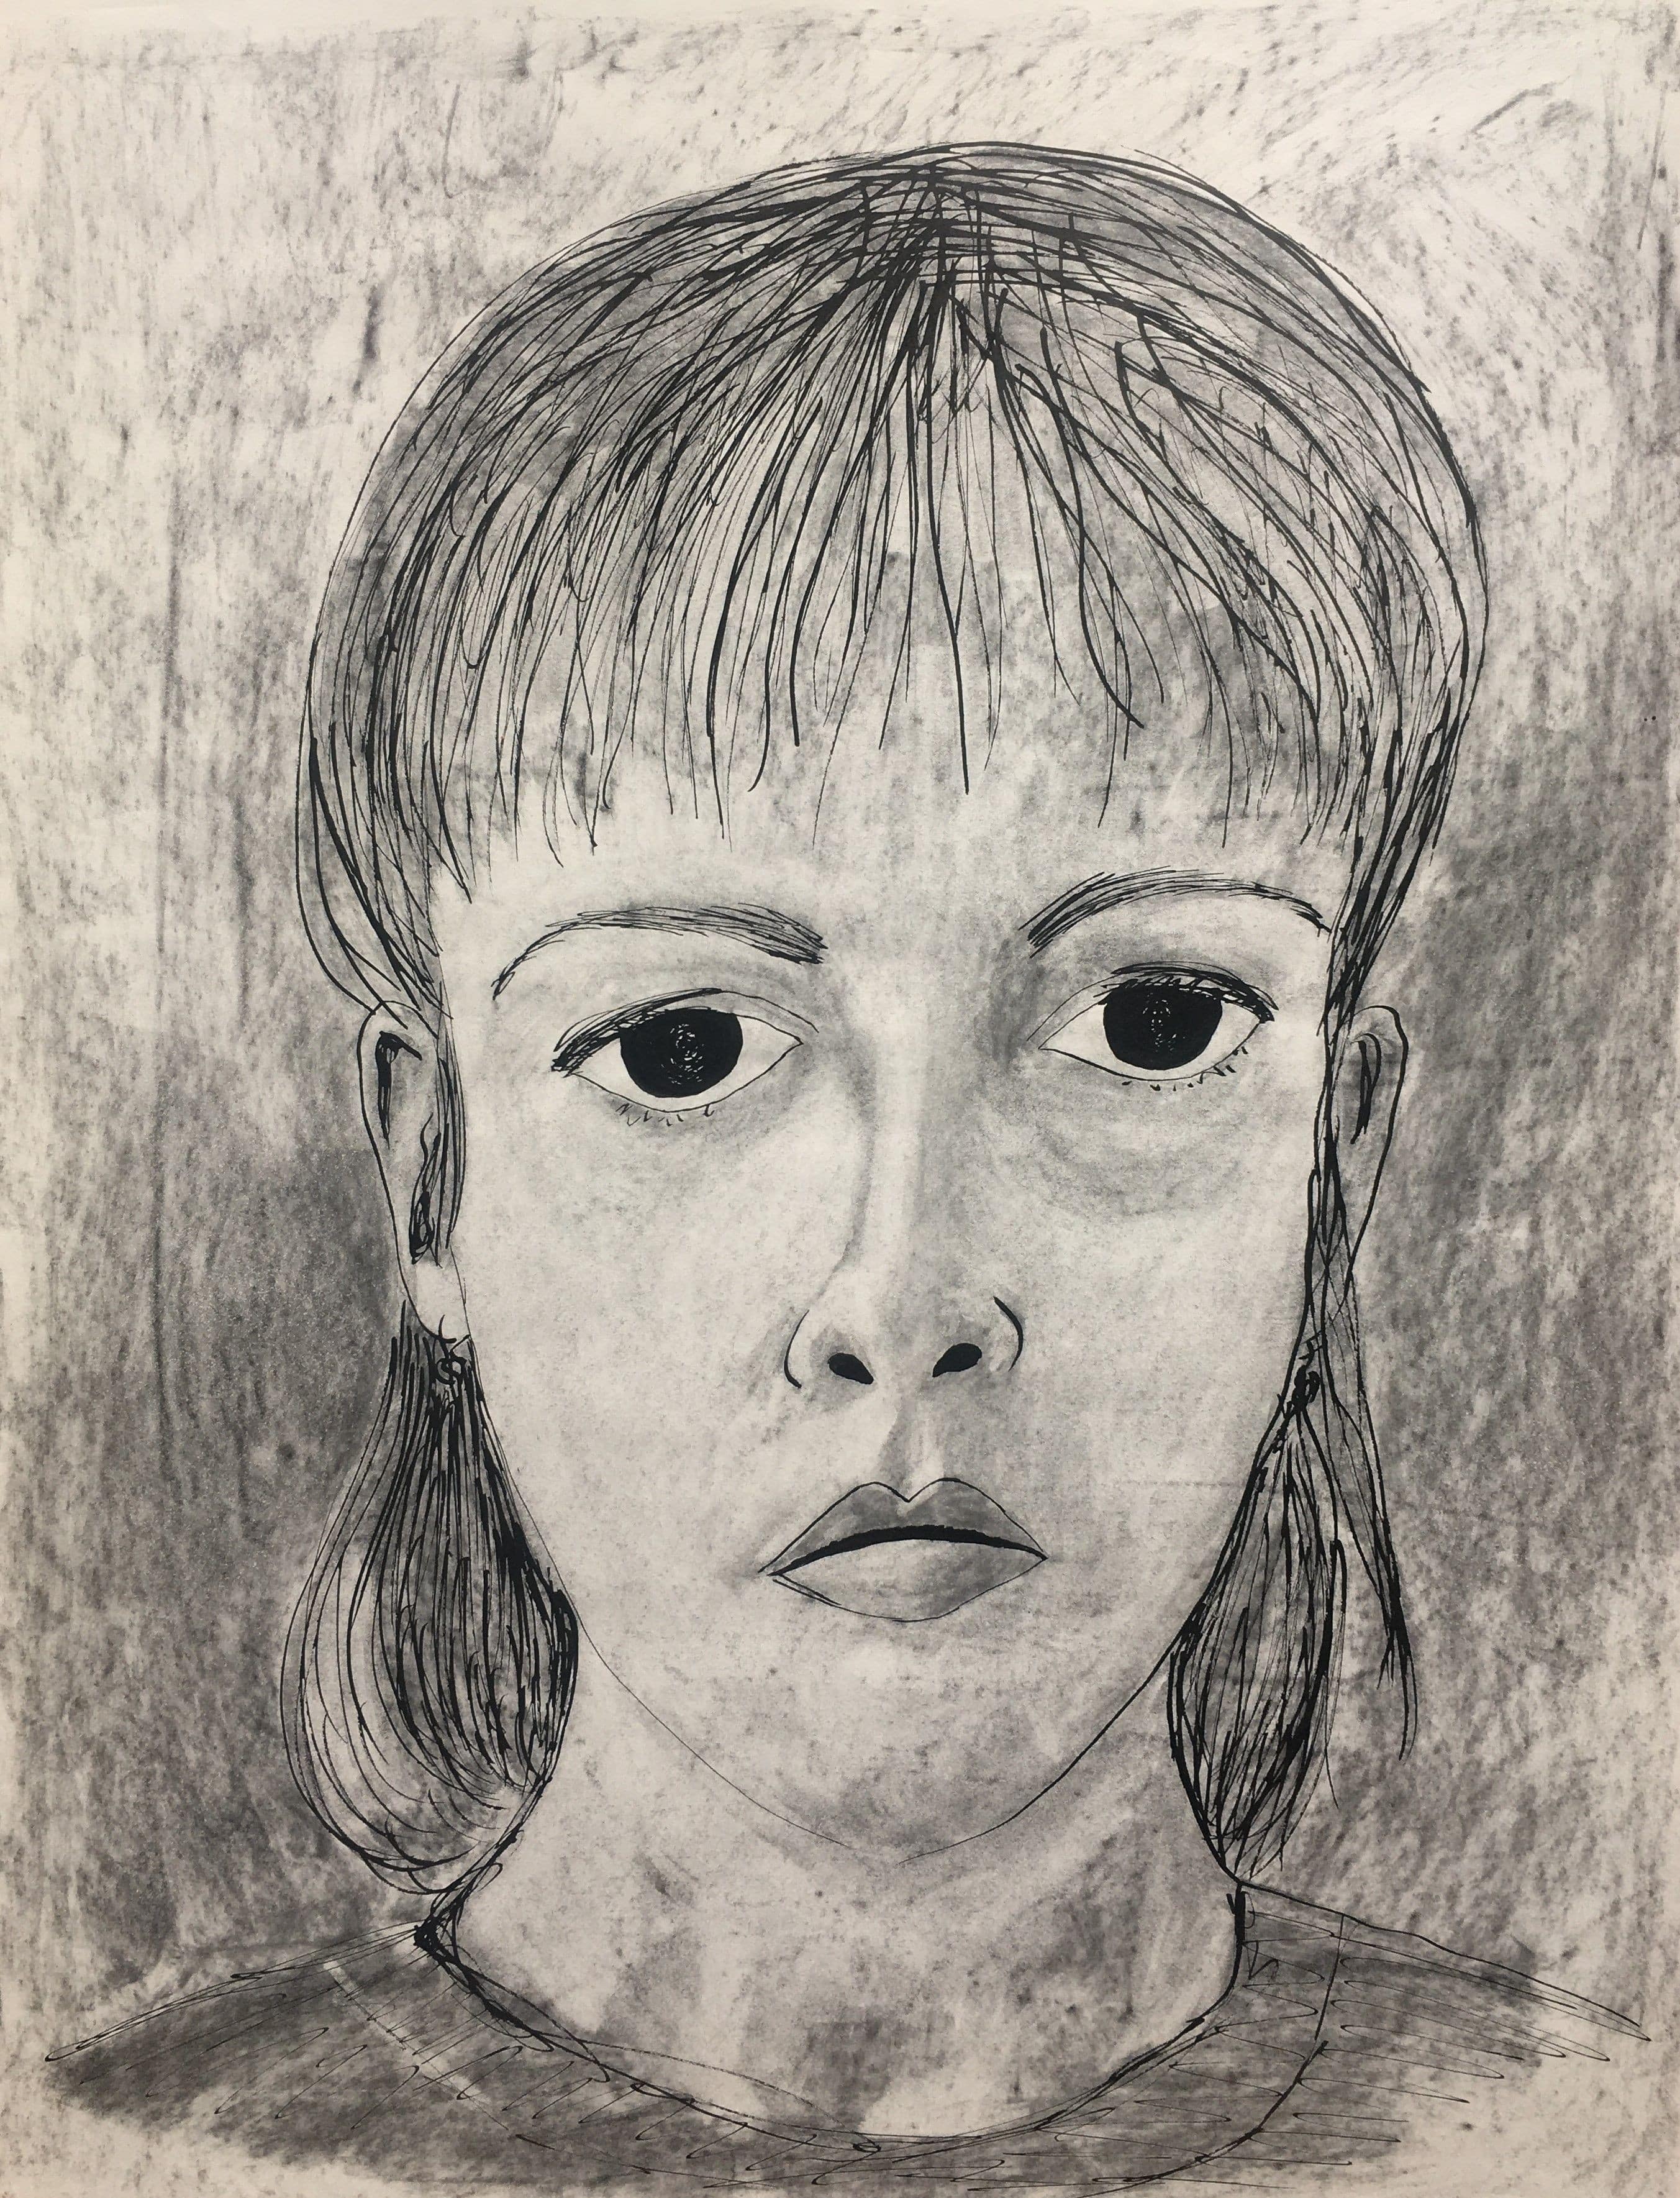 Self-Portrait, 1992
Charcoal and Ink on Paper
18"W x 24"H, Walli White, artist